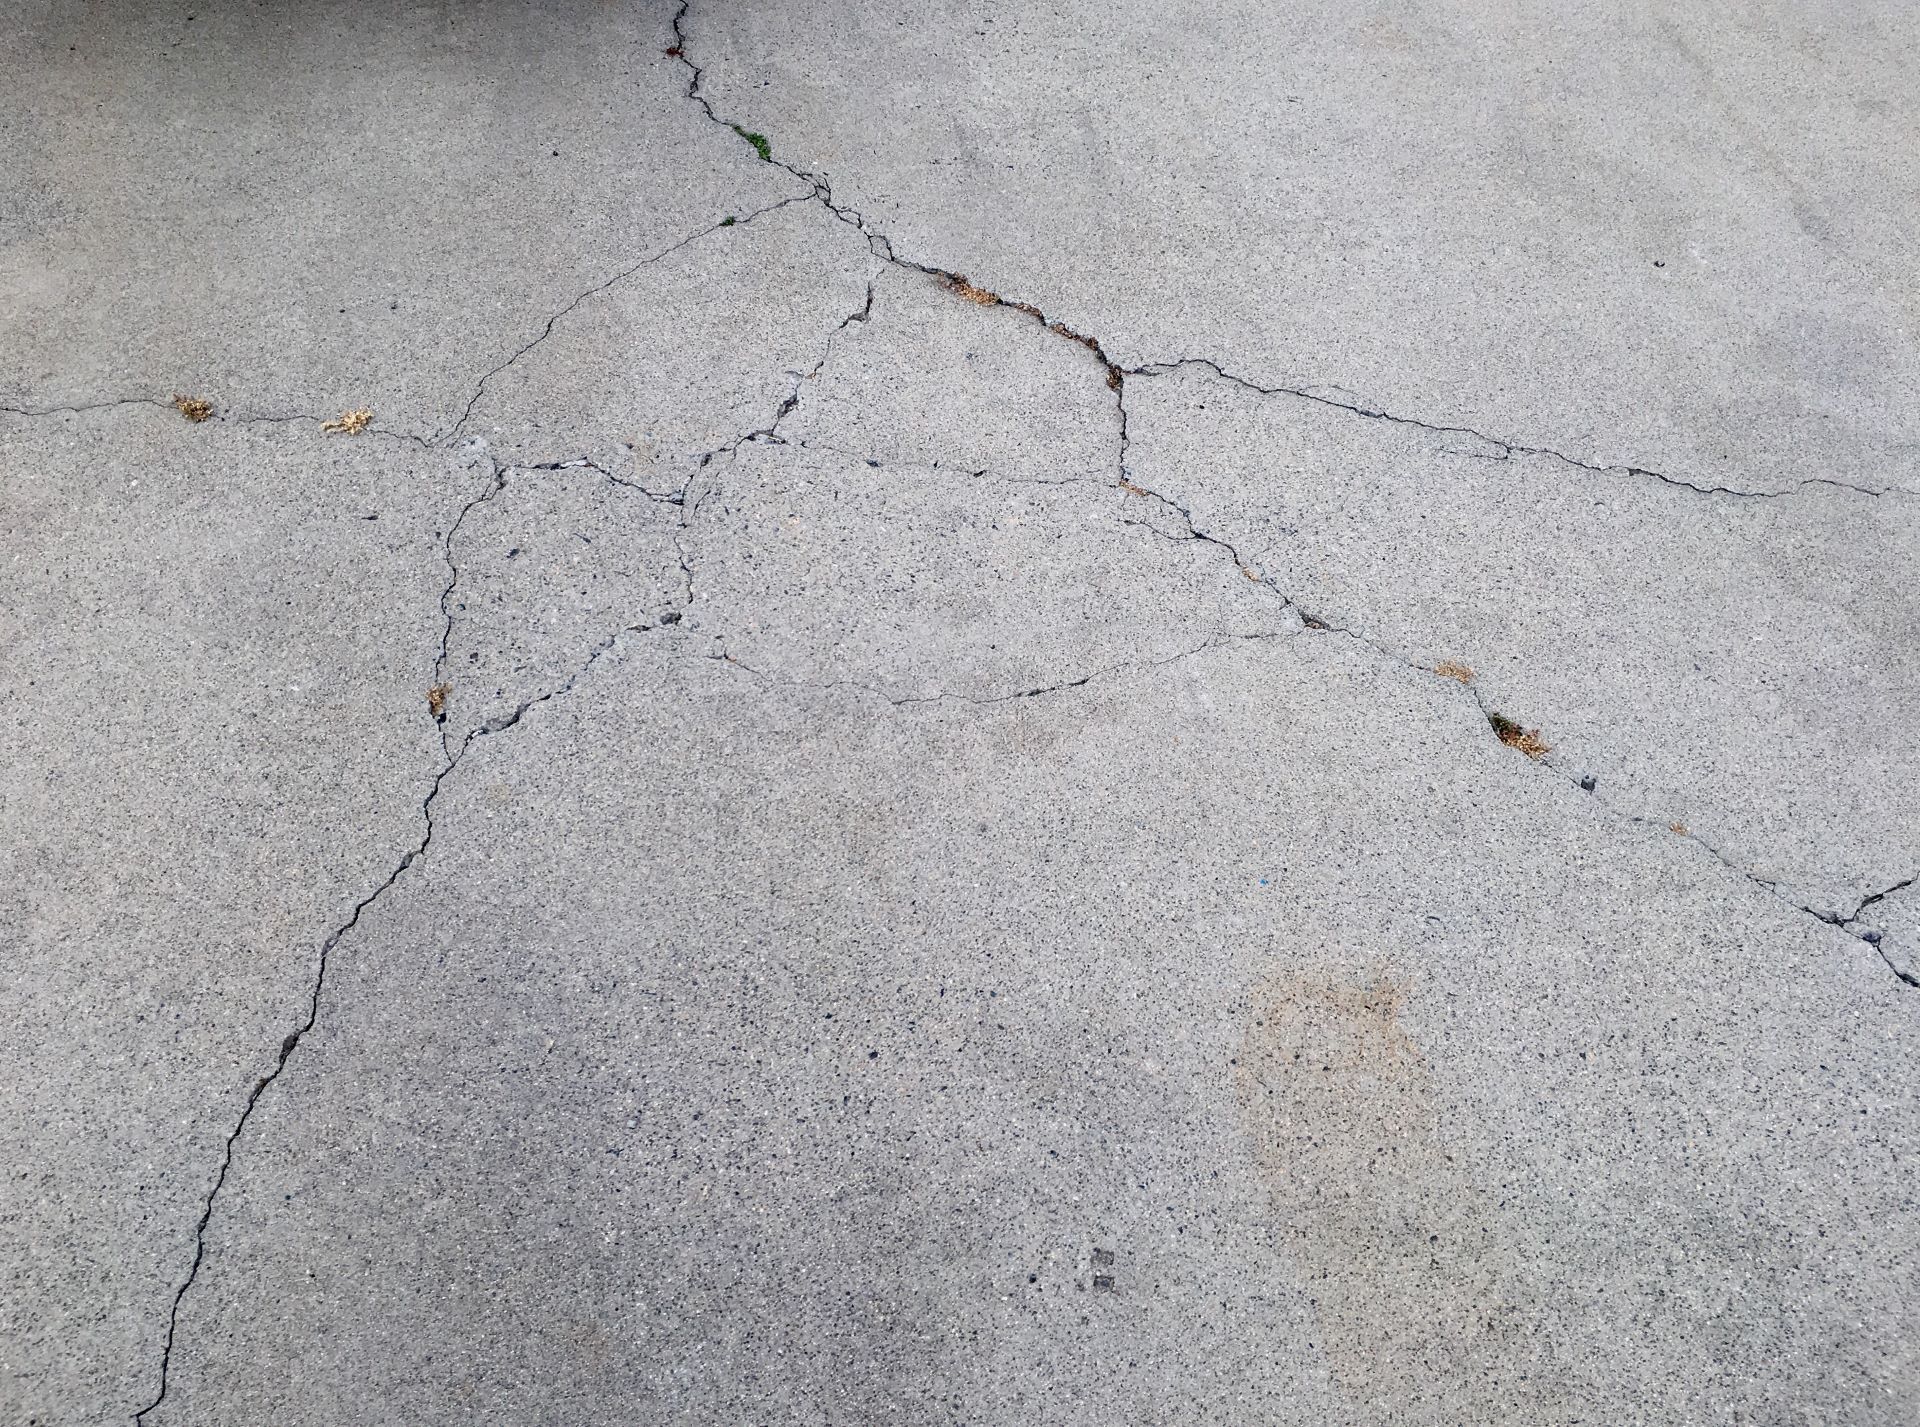 driveway damaged by tree roots, cracking